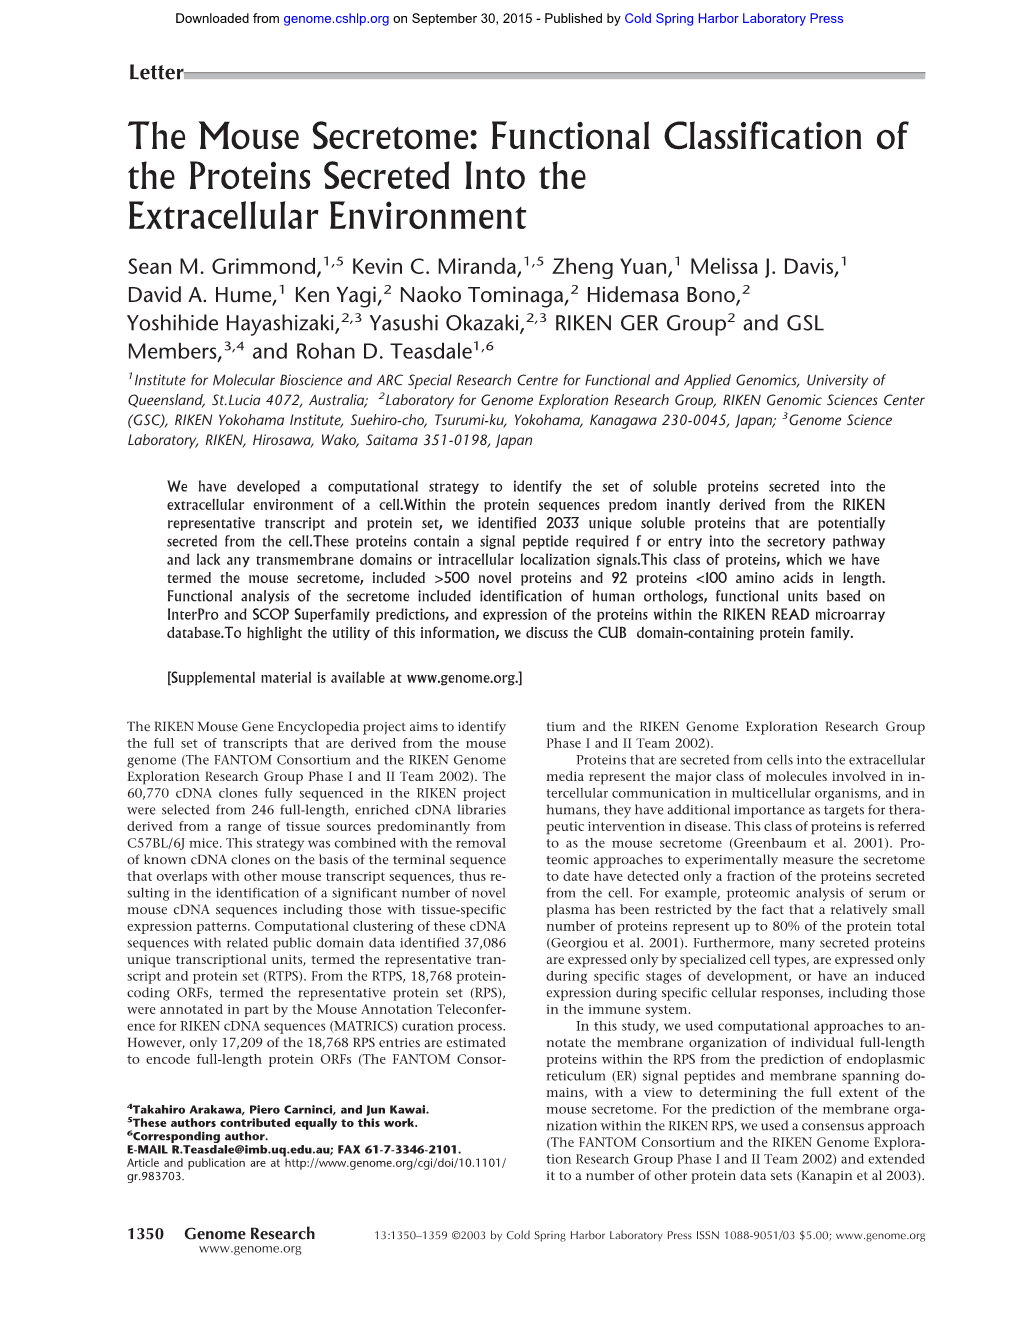 The Mouse Secretome: Functional Classification of the Proteins Secreted Into the Extracellular Environment Sean M